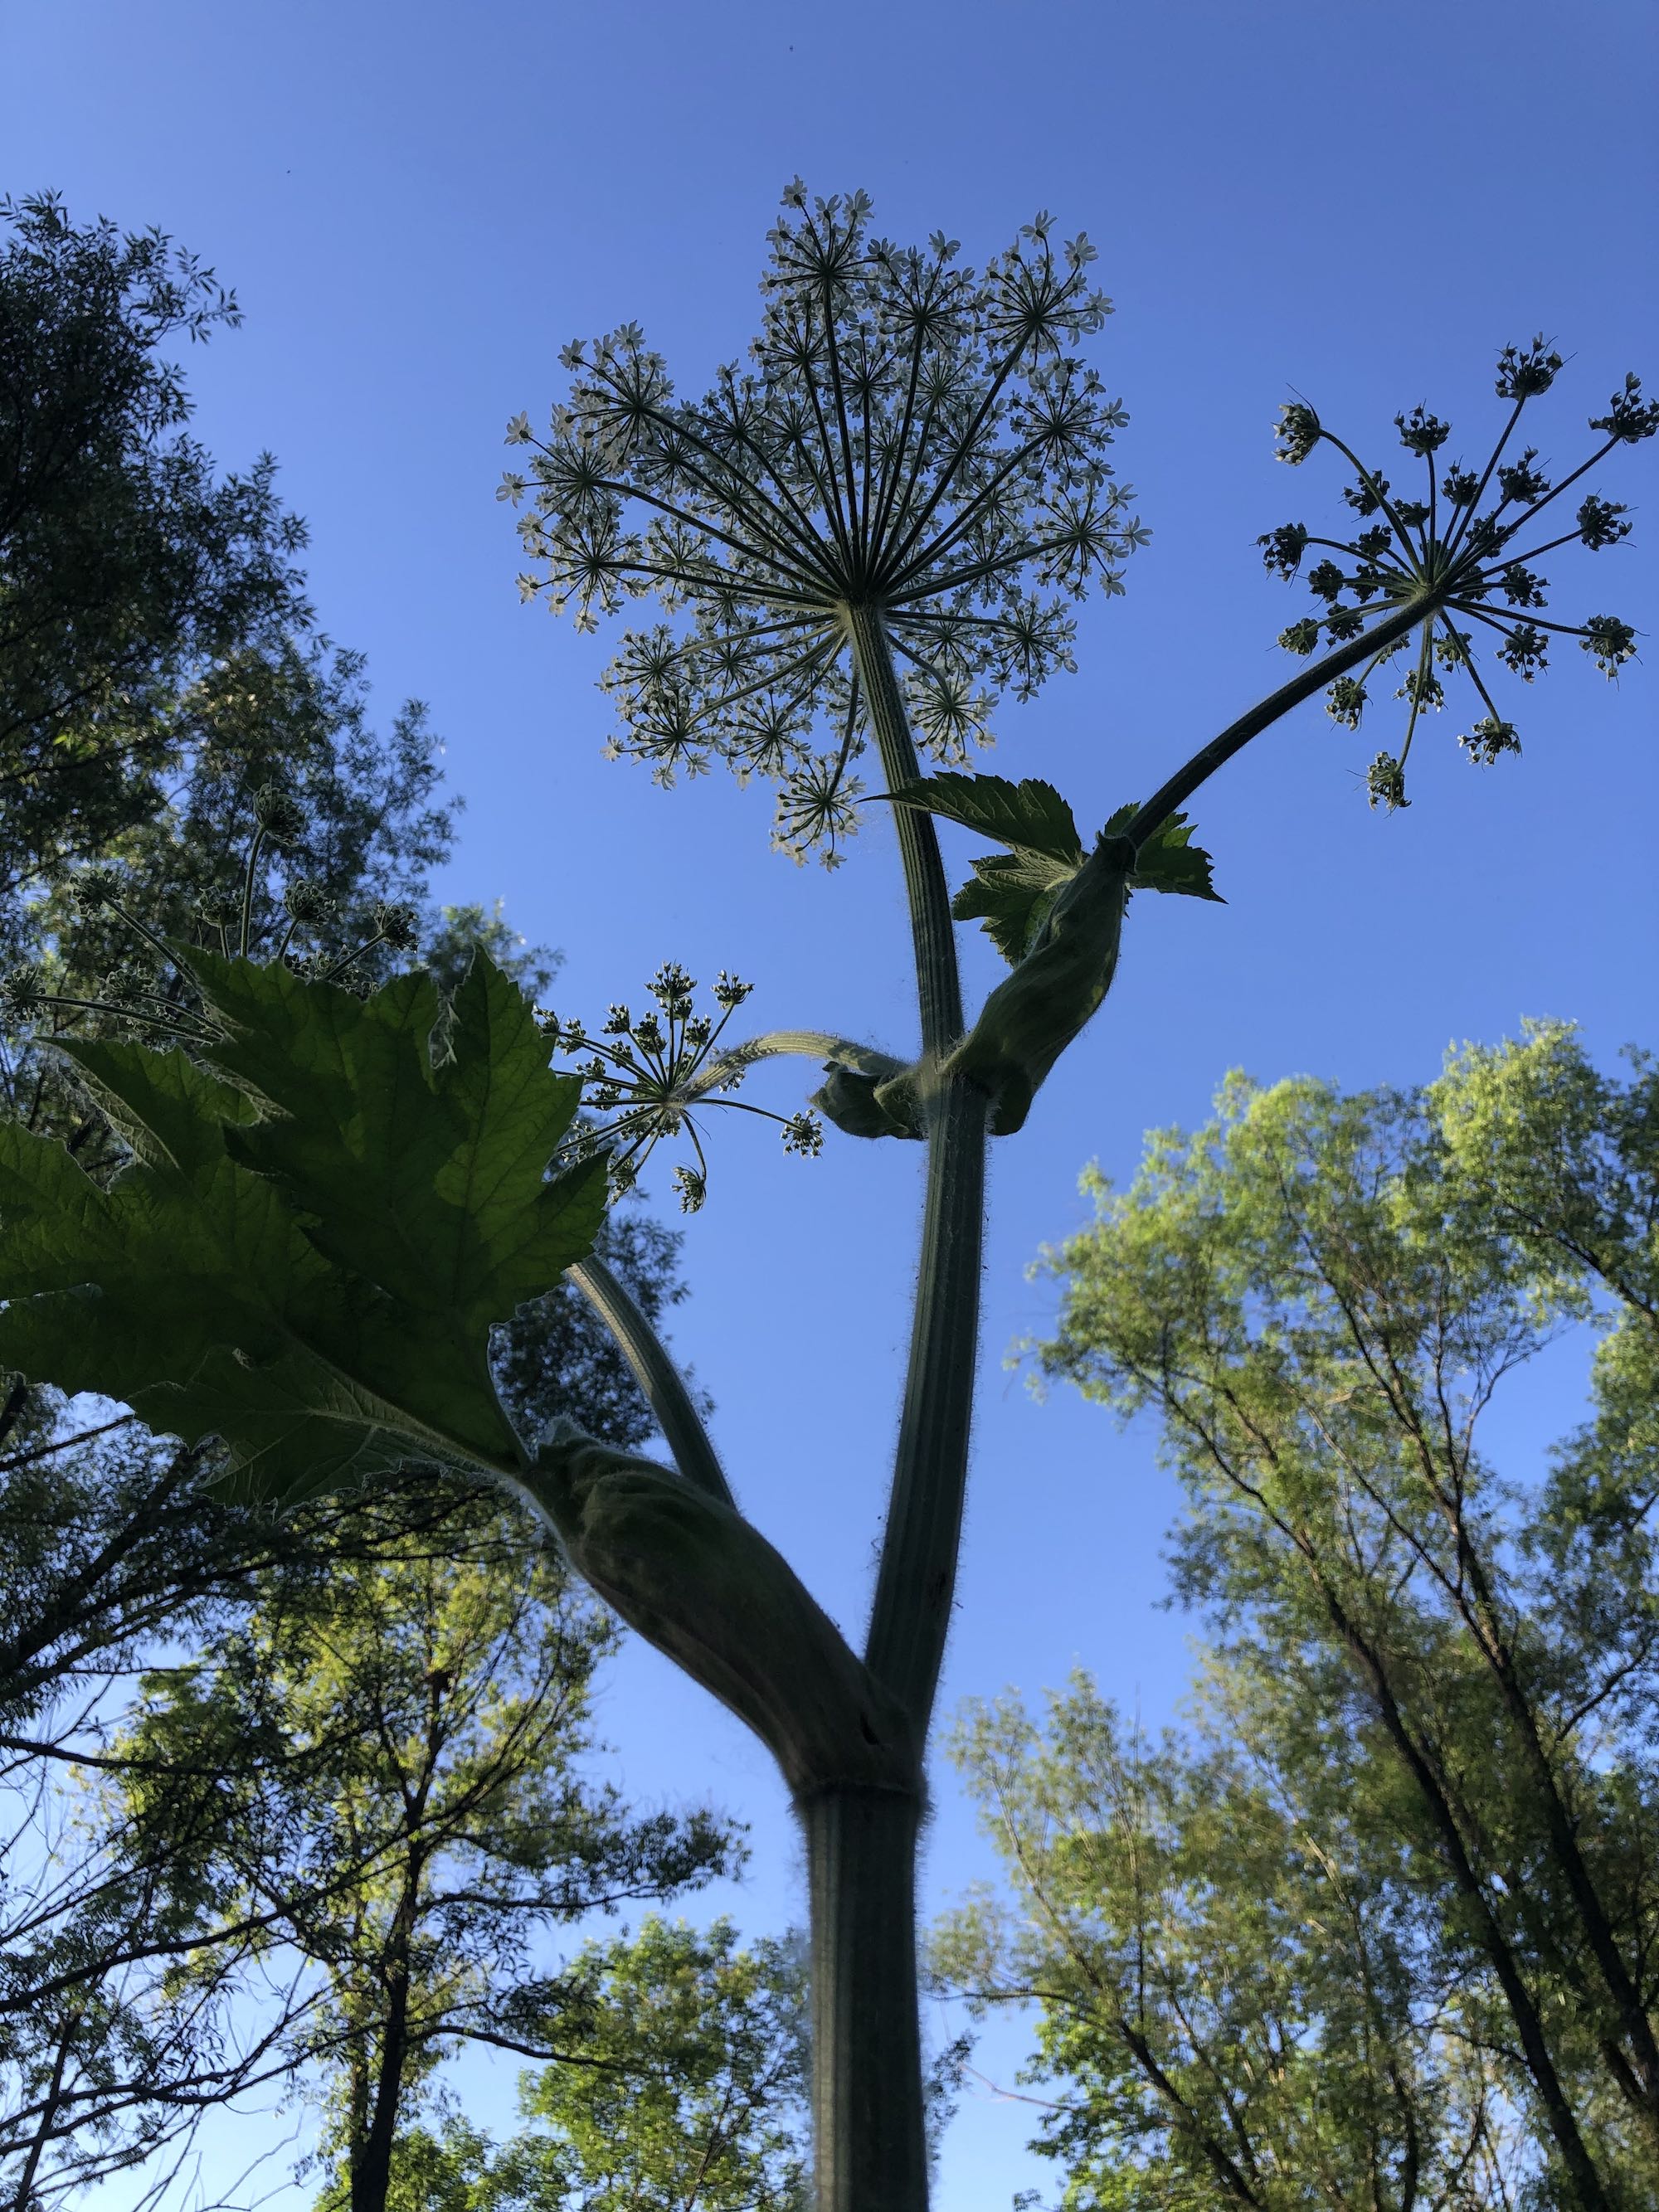 Cow Parsnip near Council Ring in Oak Savanna in Madison, Wisconsin on May 26, 2021.